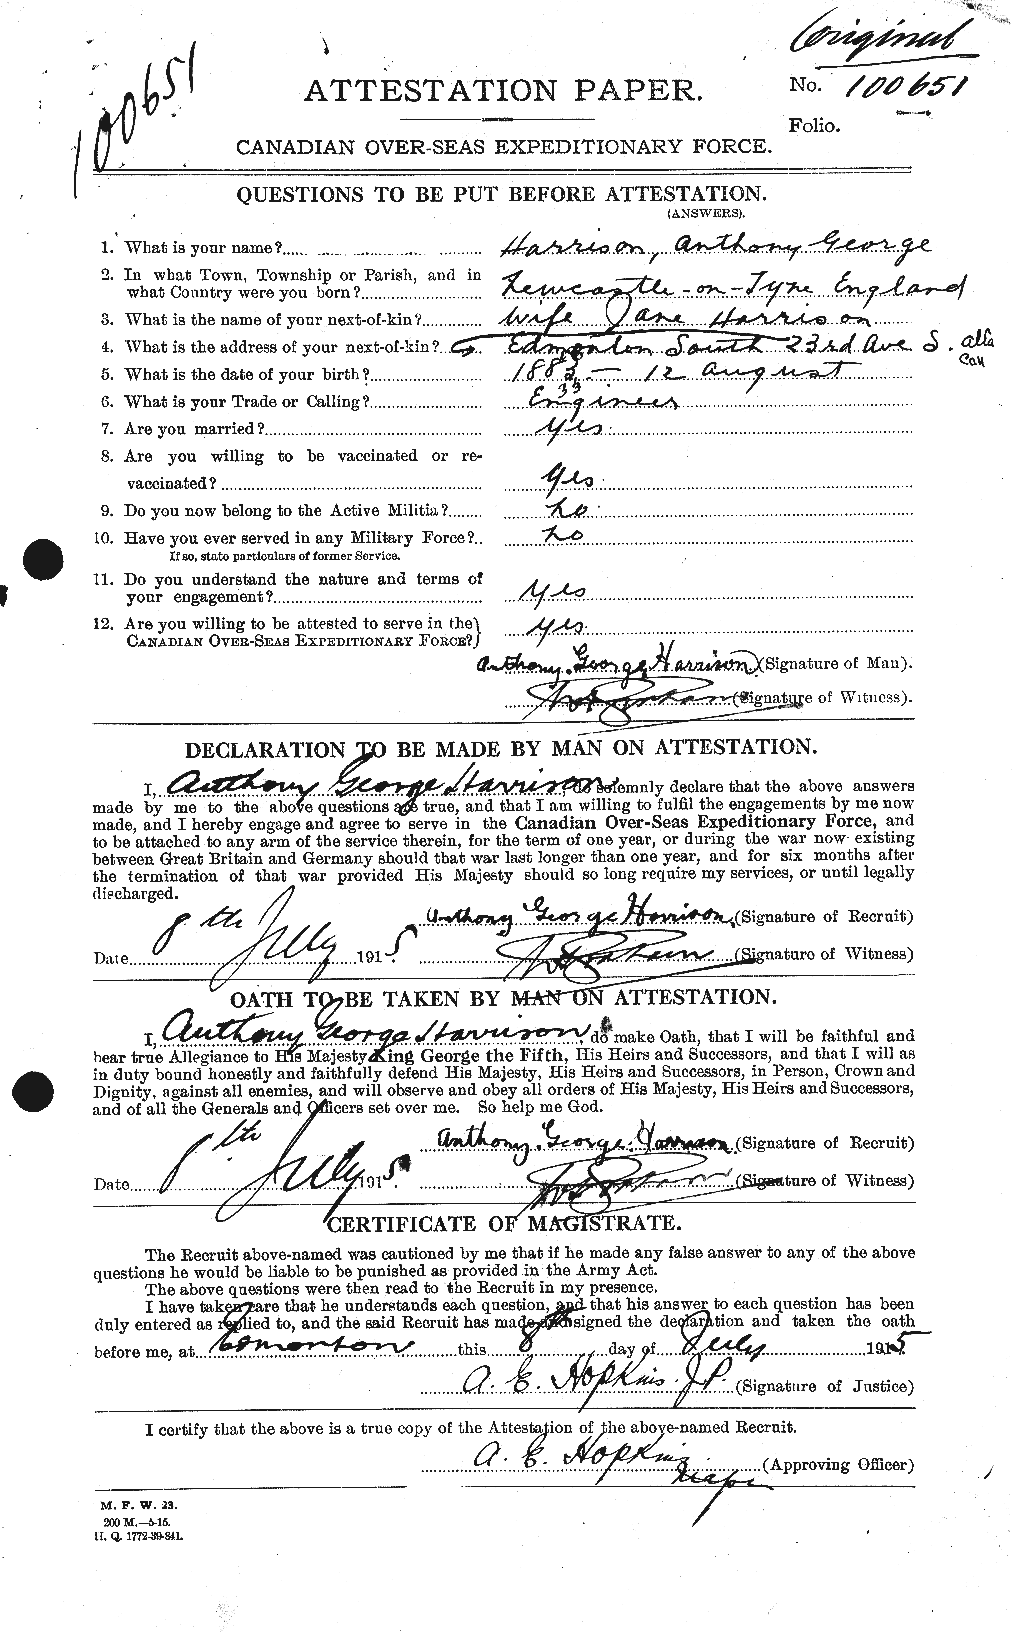 Personnel Records of the First World War - CEF 380226a